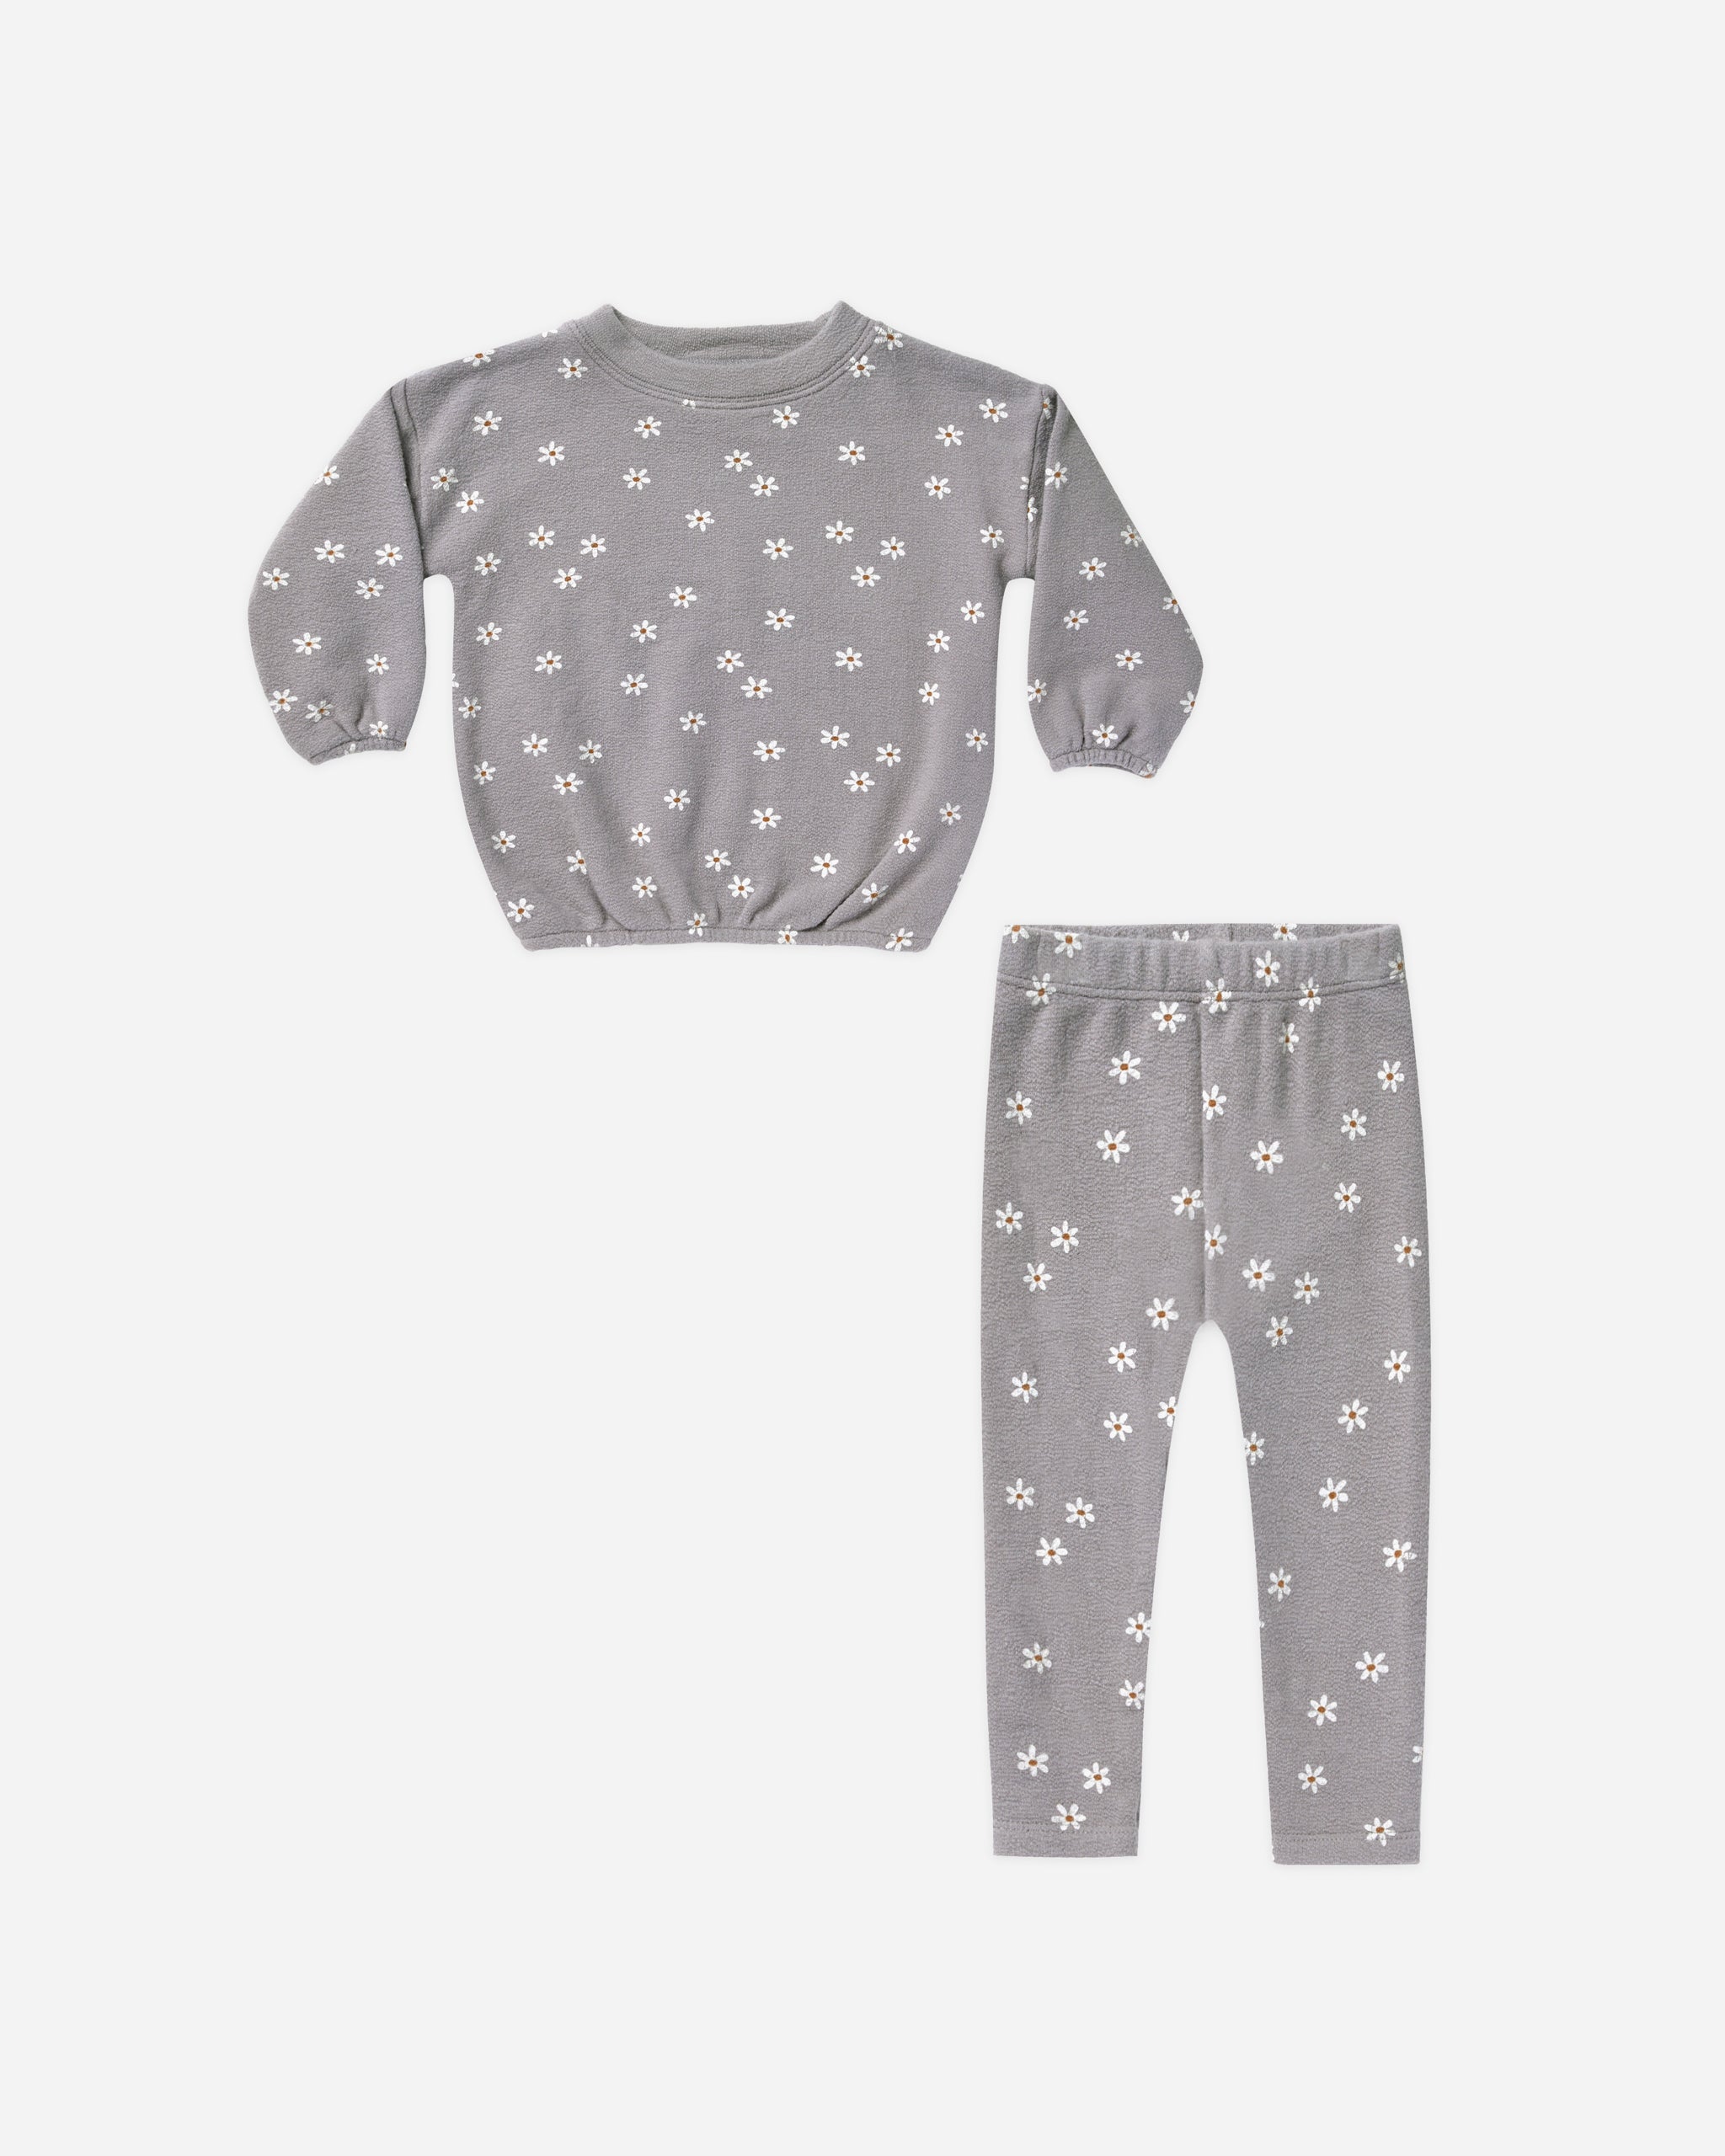 Spongey Knit Set || Daisy - Rylee + Cru | Kids Clothes | Trendy Baby Clothes | Modern Infant Outfits |